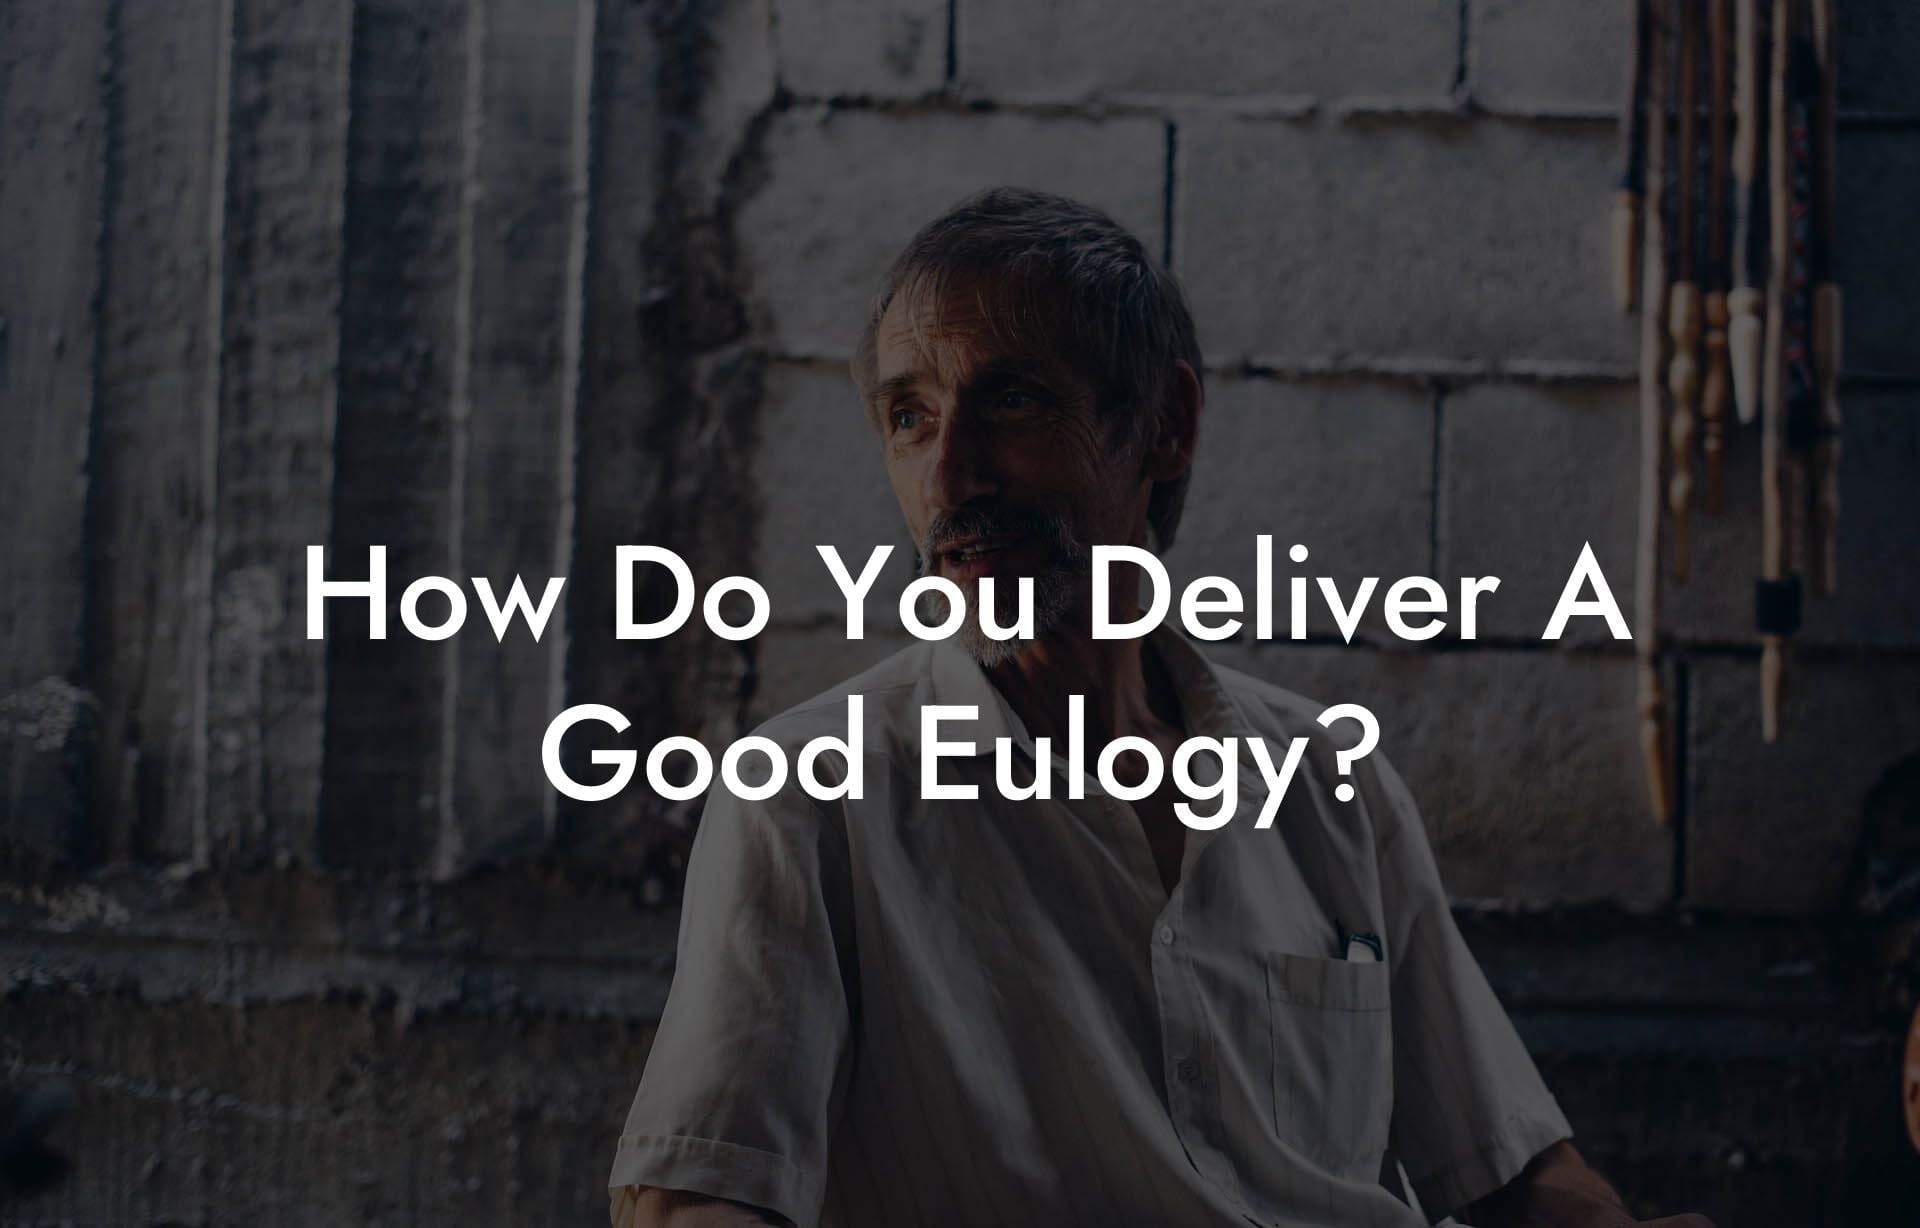 How Do You Deliver A Good Eulogy?